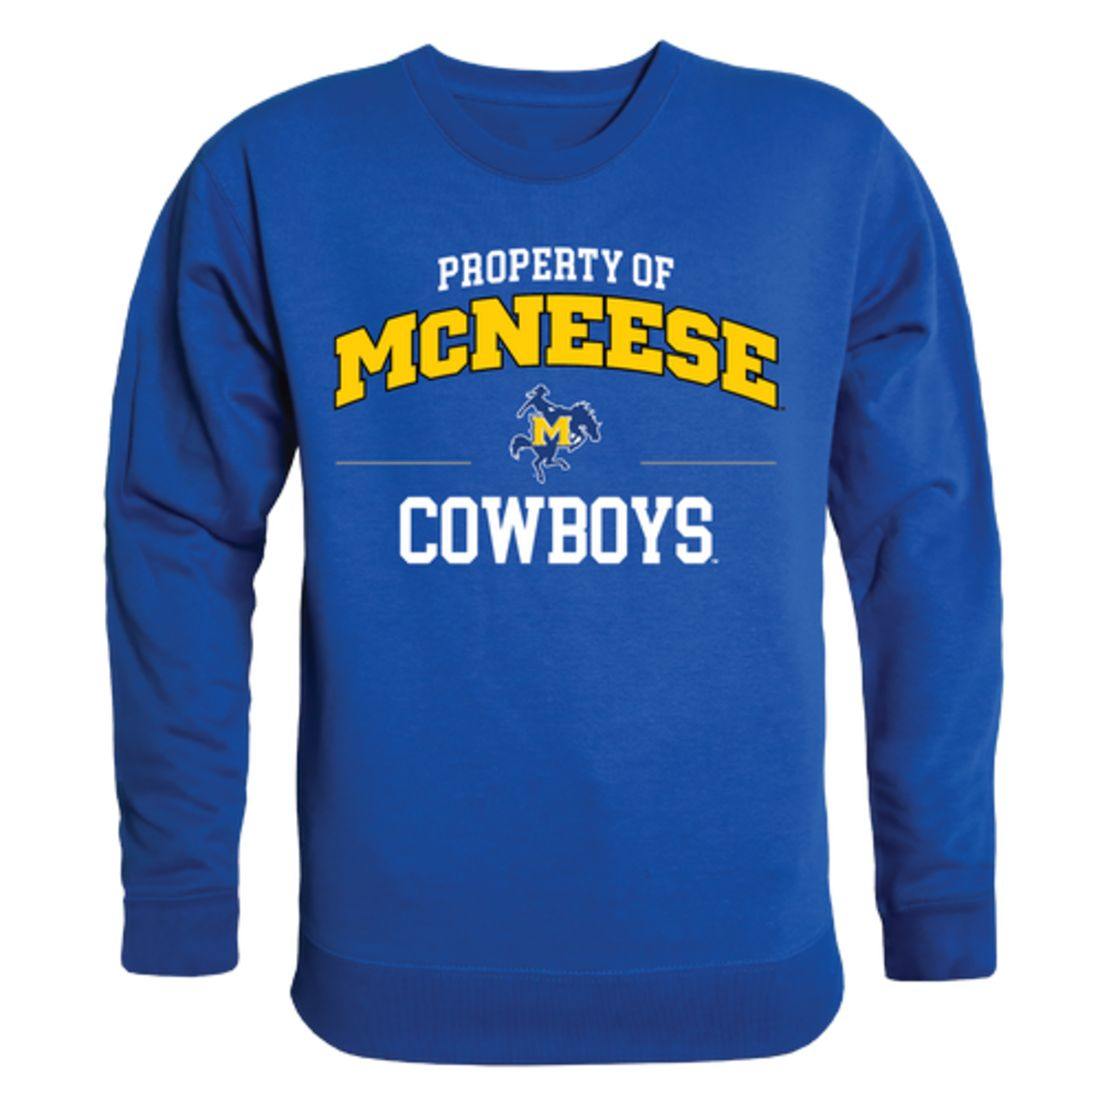 McNeese State University Cowboys and Cowgirls Property Crewneck Pullover Sweatshirt Sweater Royal-Campus-Wardrobe